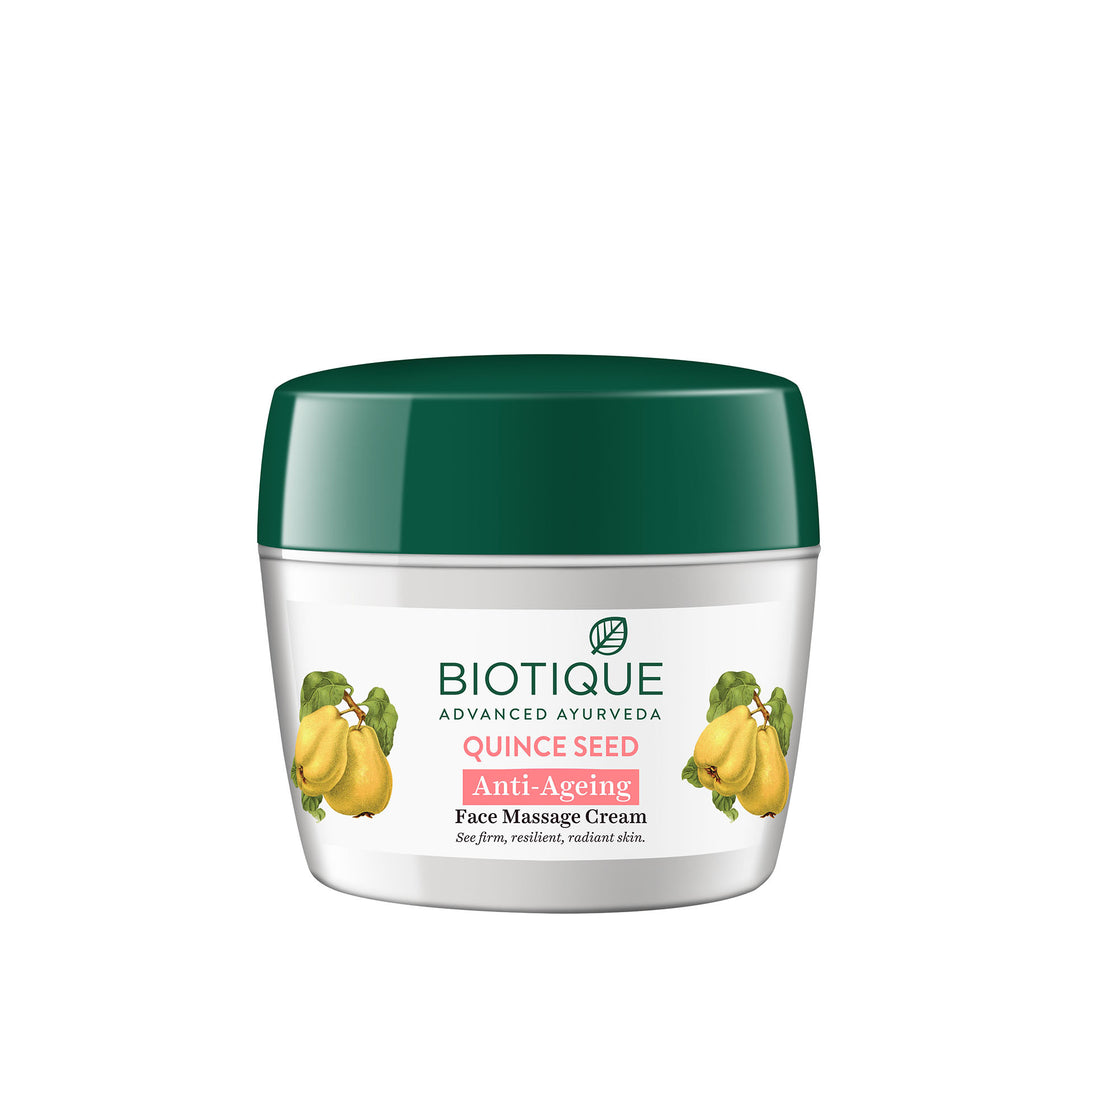 Biotique Quince Seed Anti-Ageing Face Massage Cream (175Gm)